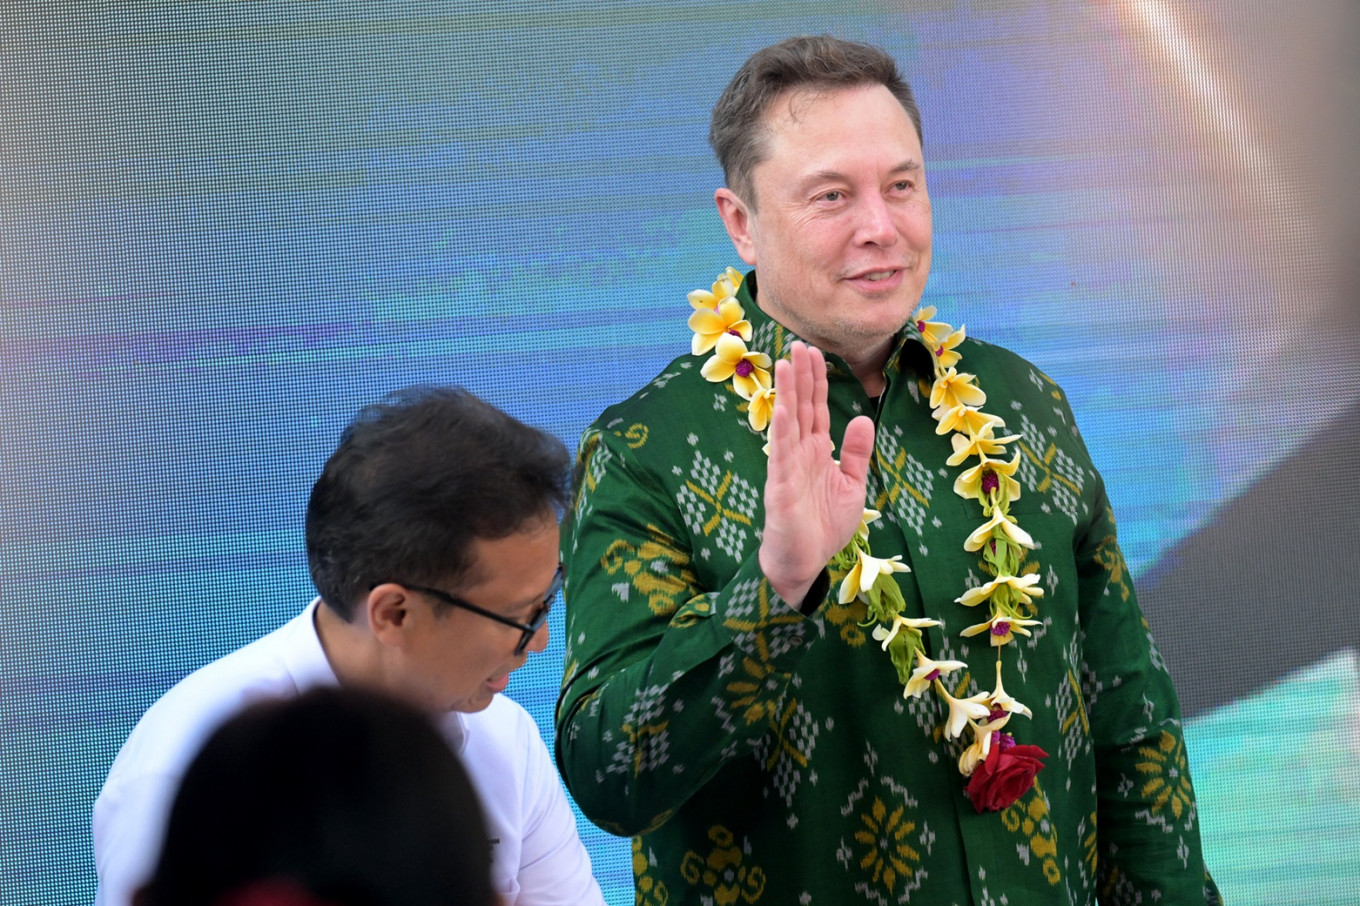 Elon Musk launches SpaceX’s satellite internet service in Indonesia